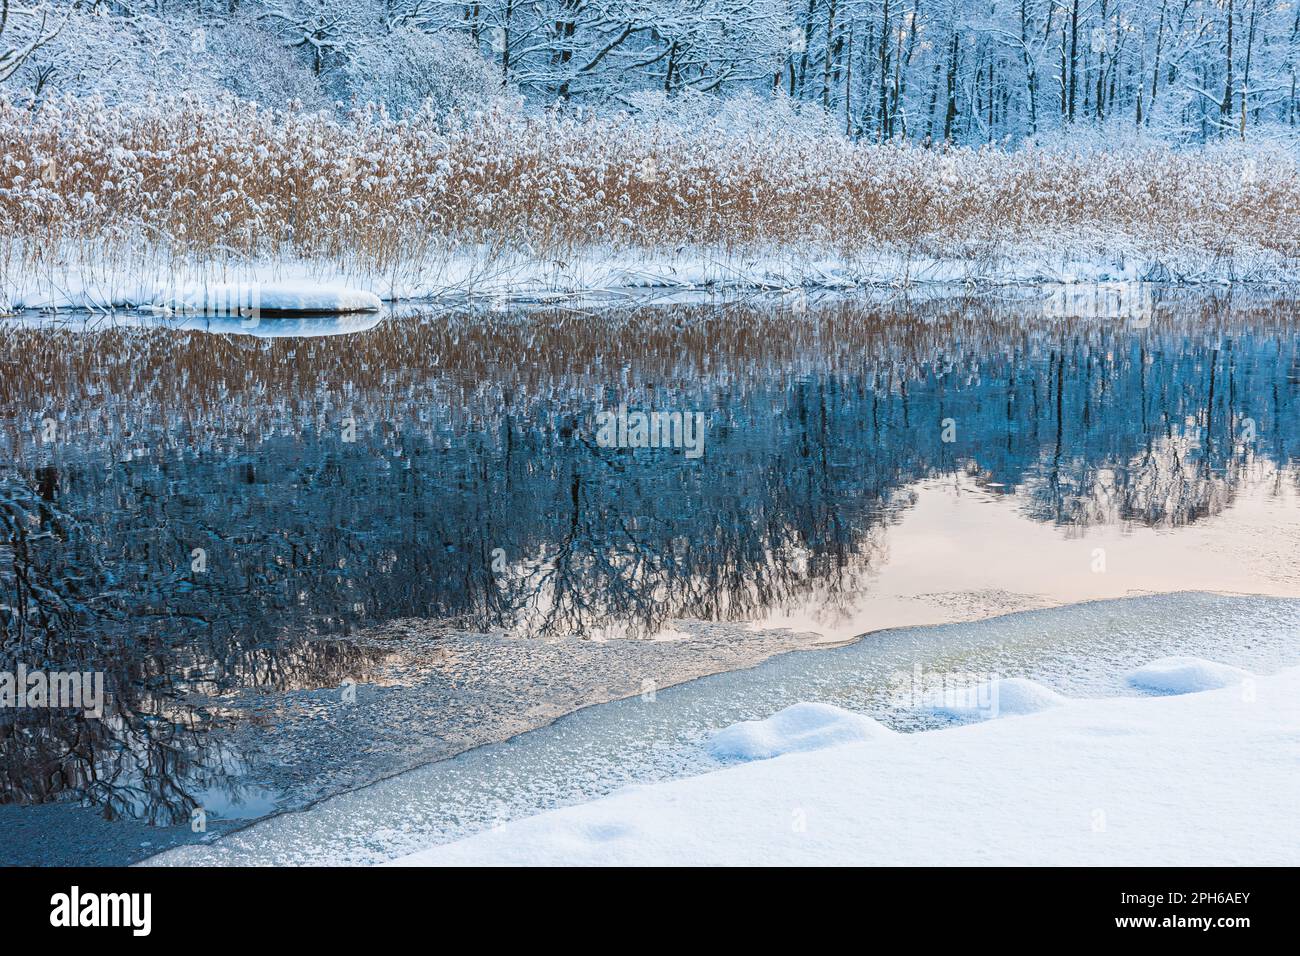 A serene winter scene of a snow-covered river reflecting the frosty reeds in tranquil stillness. Stock Photo